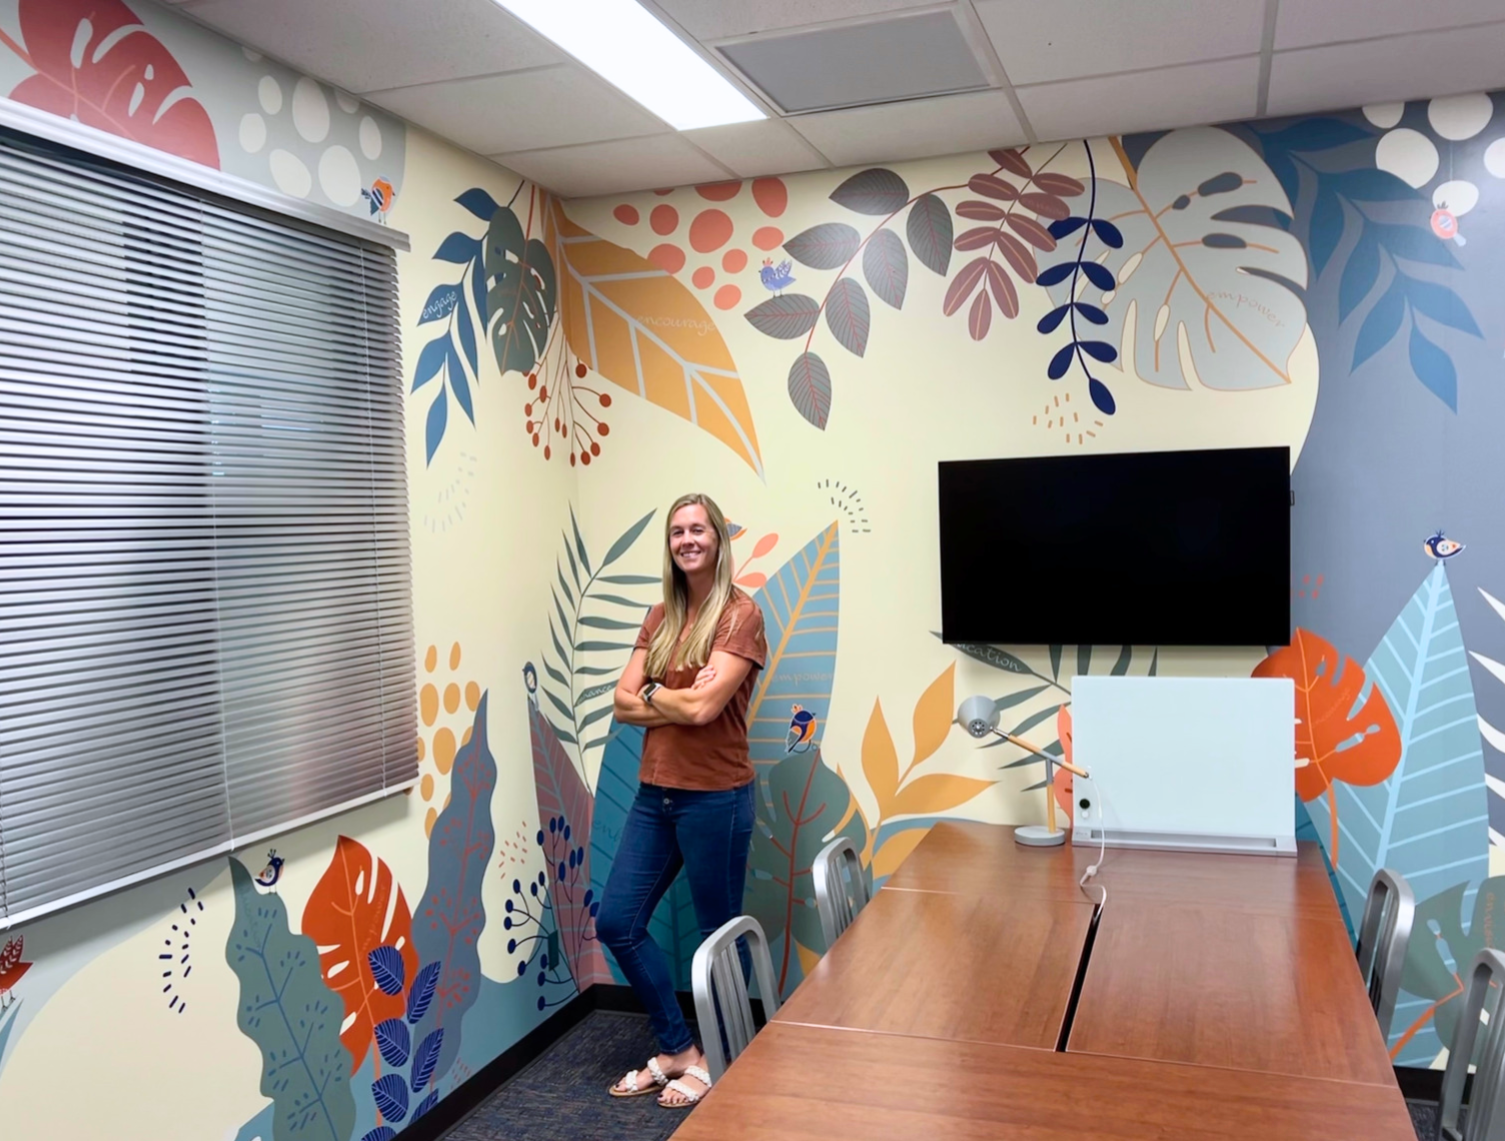 Lindy Carlisle stands in front of the floral-patterned mural in the (dis)Ability Design Studio